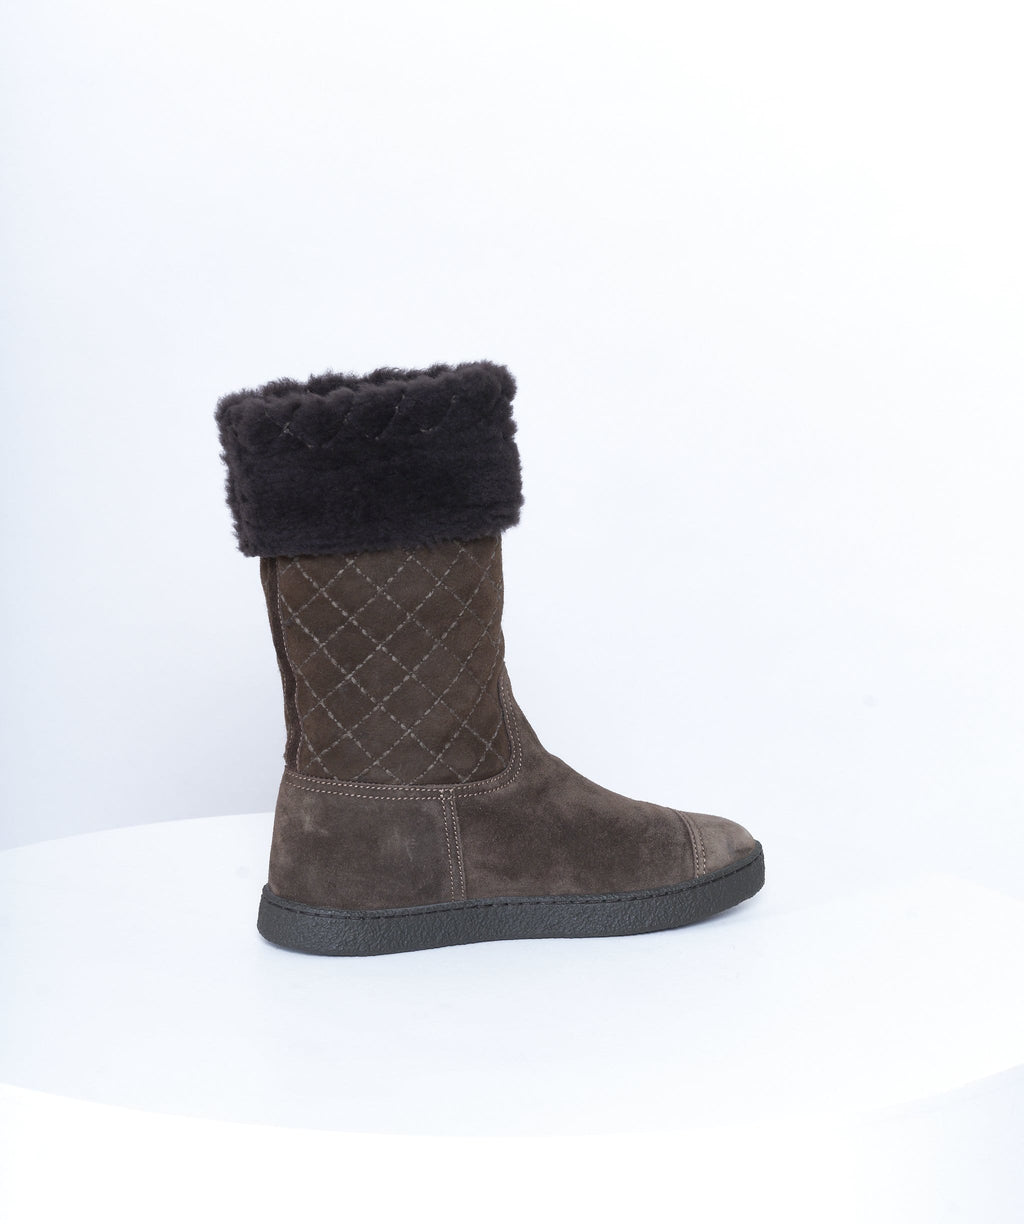 Chanel shearling boots size 37 – LuxuryPromise